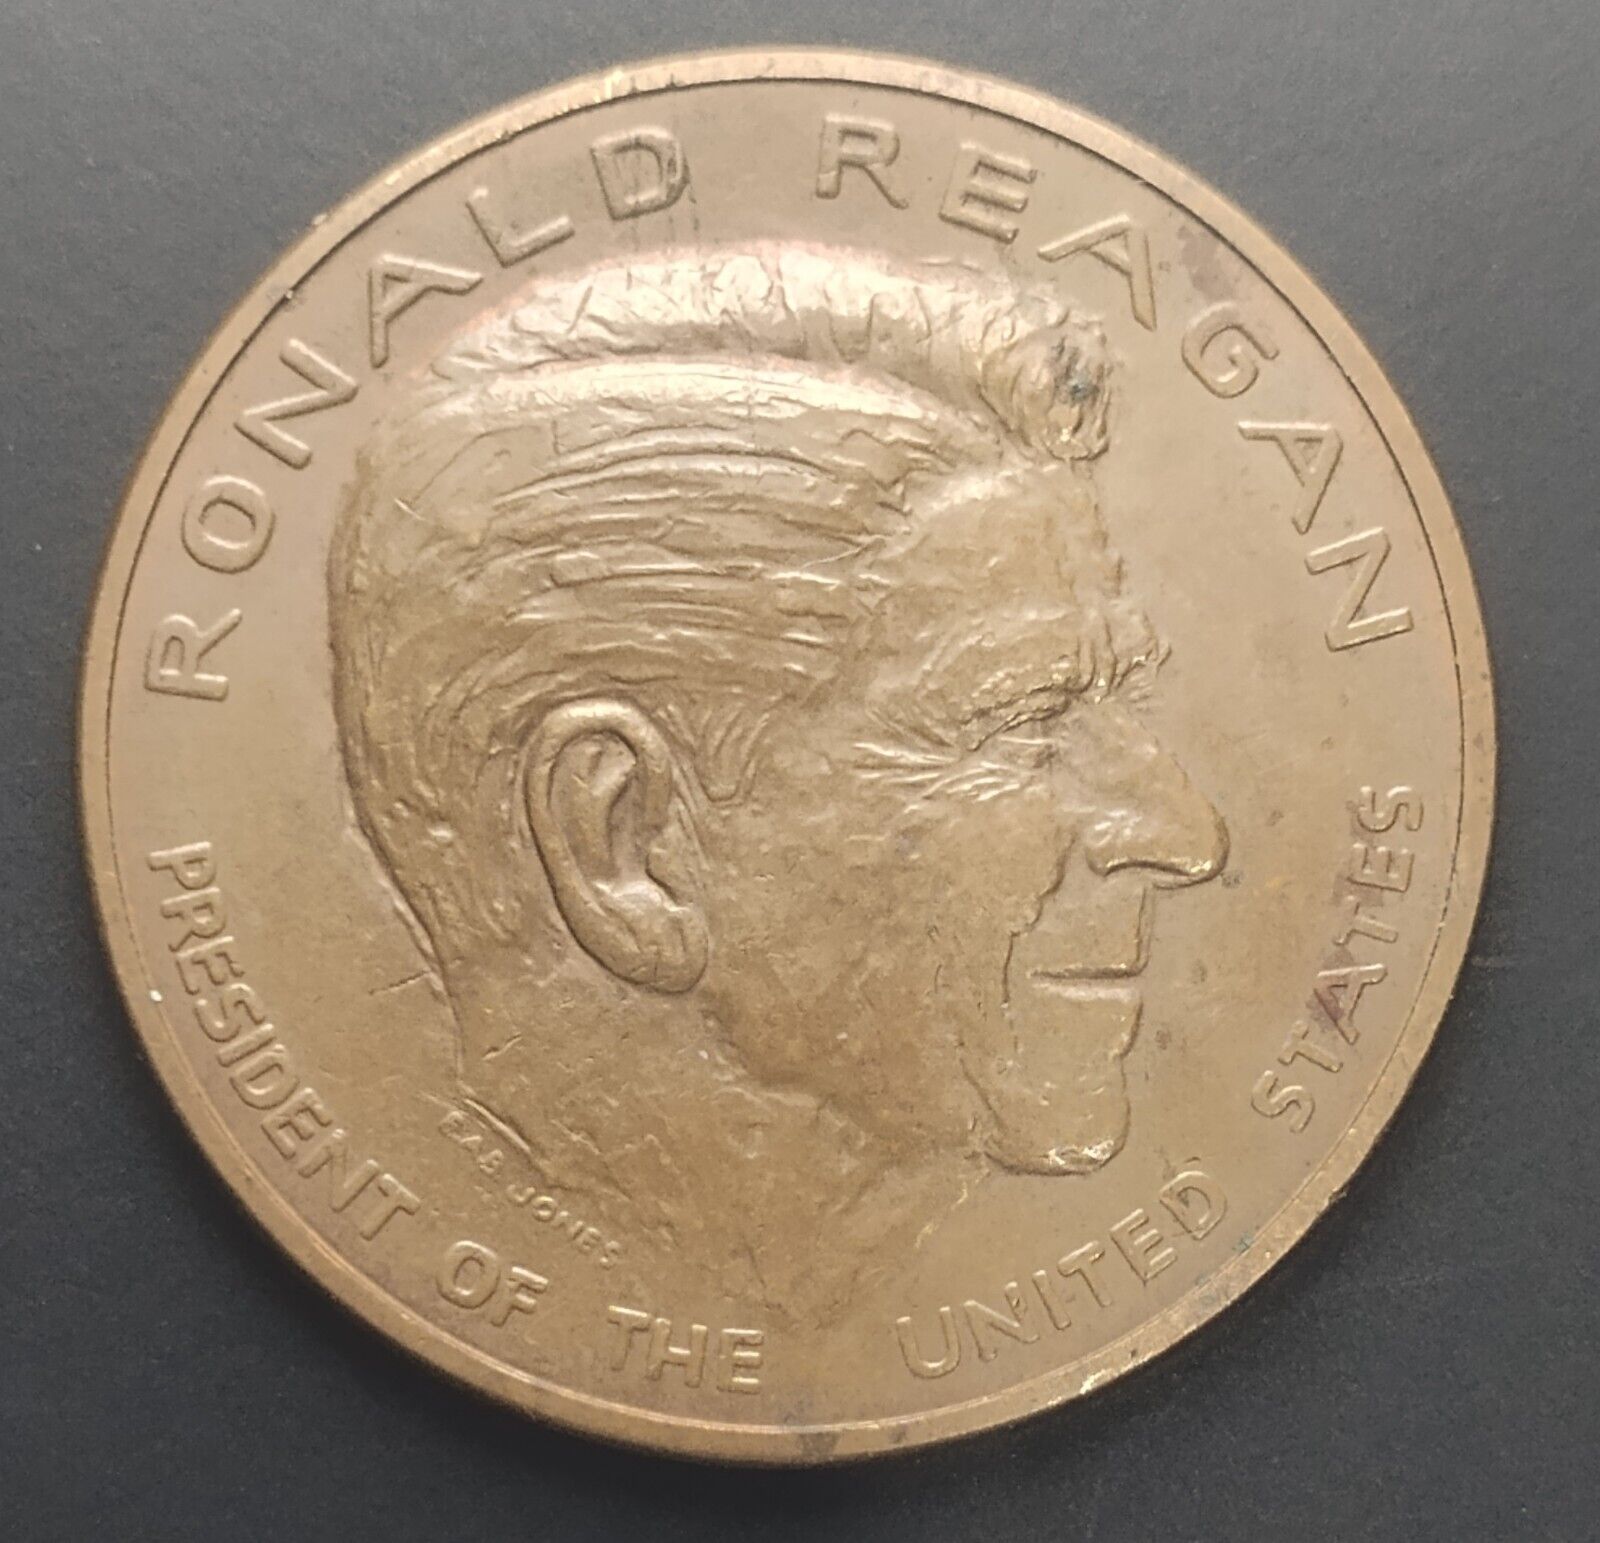 United States Mint Treasury Ronald Reagan 40th President Bronze Coin/Medal 1981